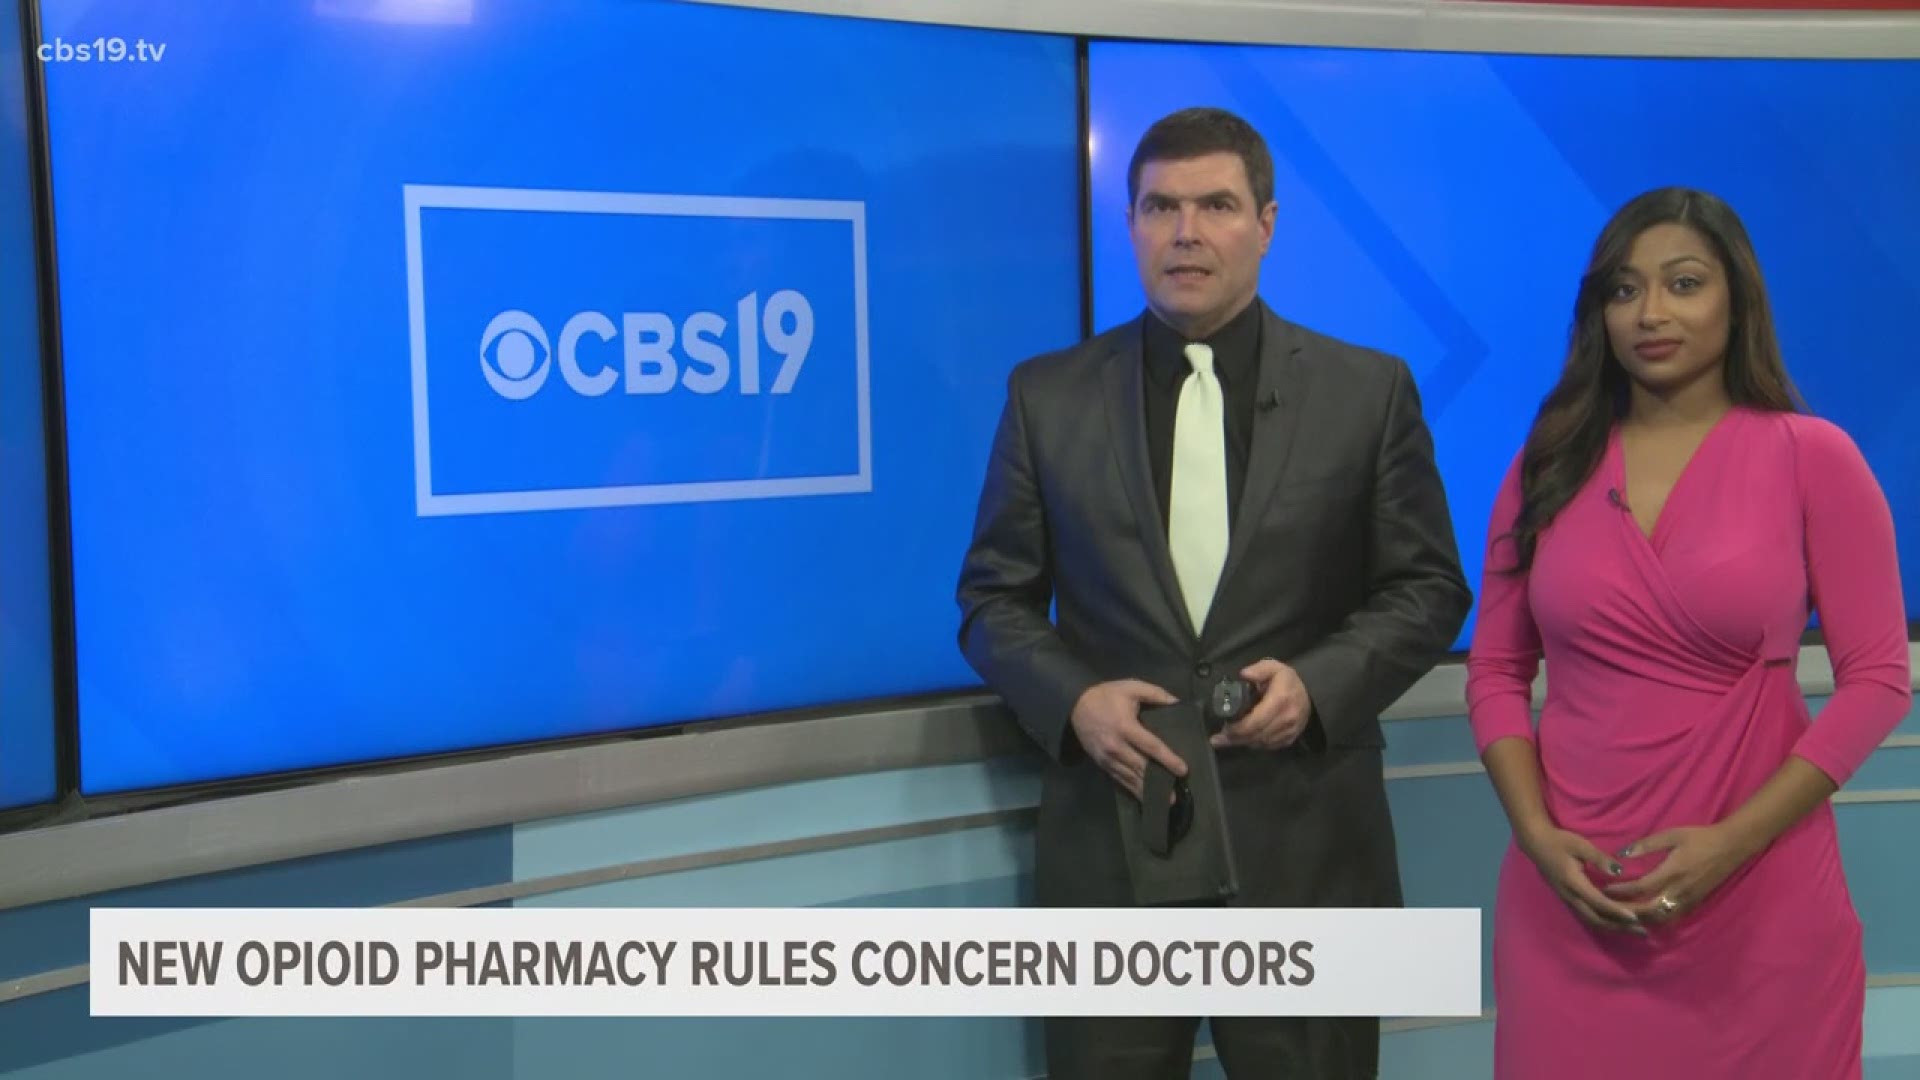 Several new pharmacy prescription rules have been put into place in past months, giving pharmacists more room to question the legitimacy of prescriptions before filling them. But some physicians fear these new rules could easily allow pharmacists to cross